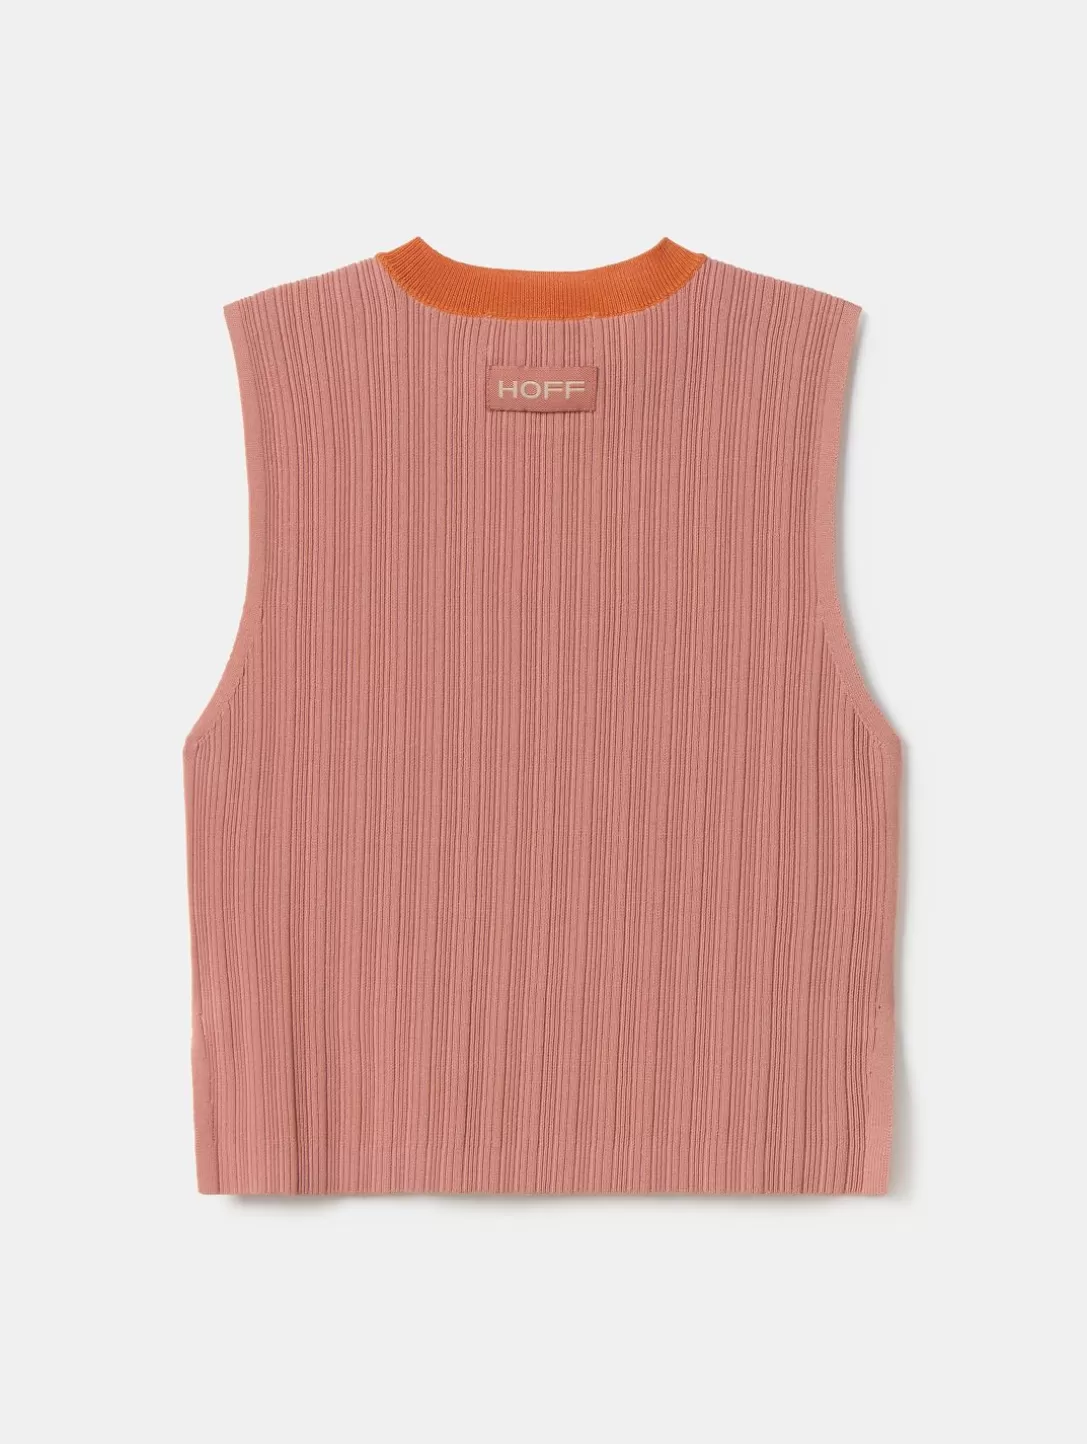 HOFF Top Tricot Pink Discount